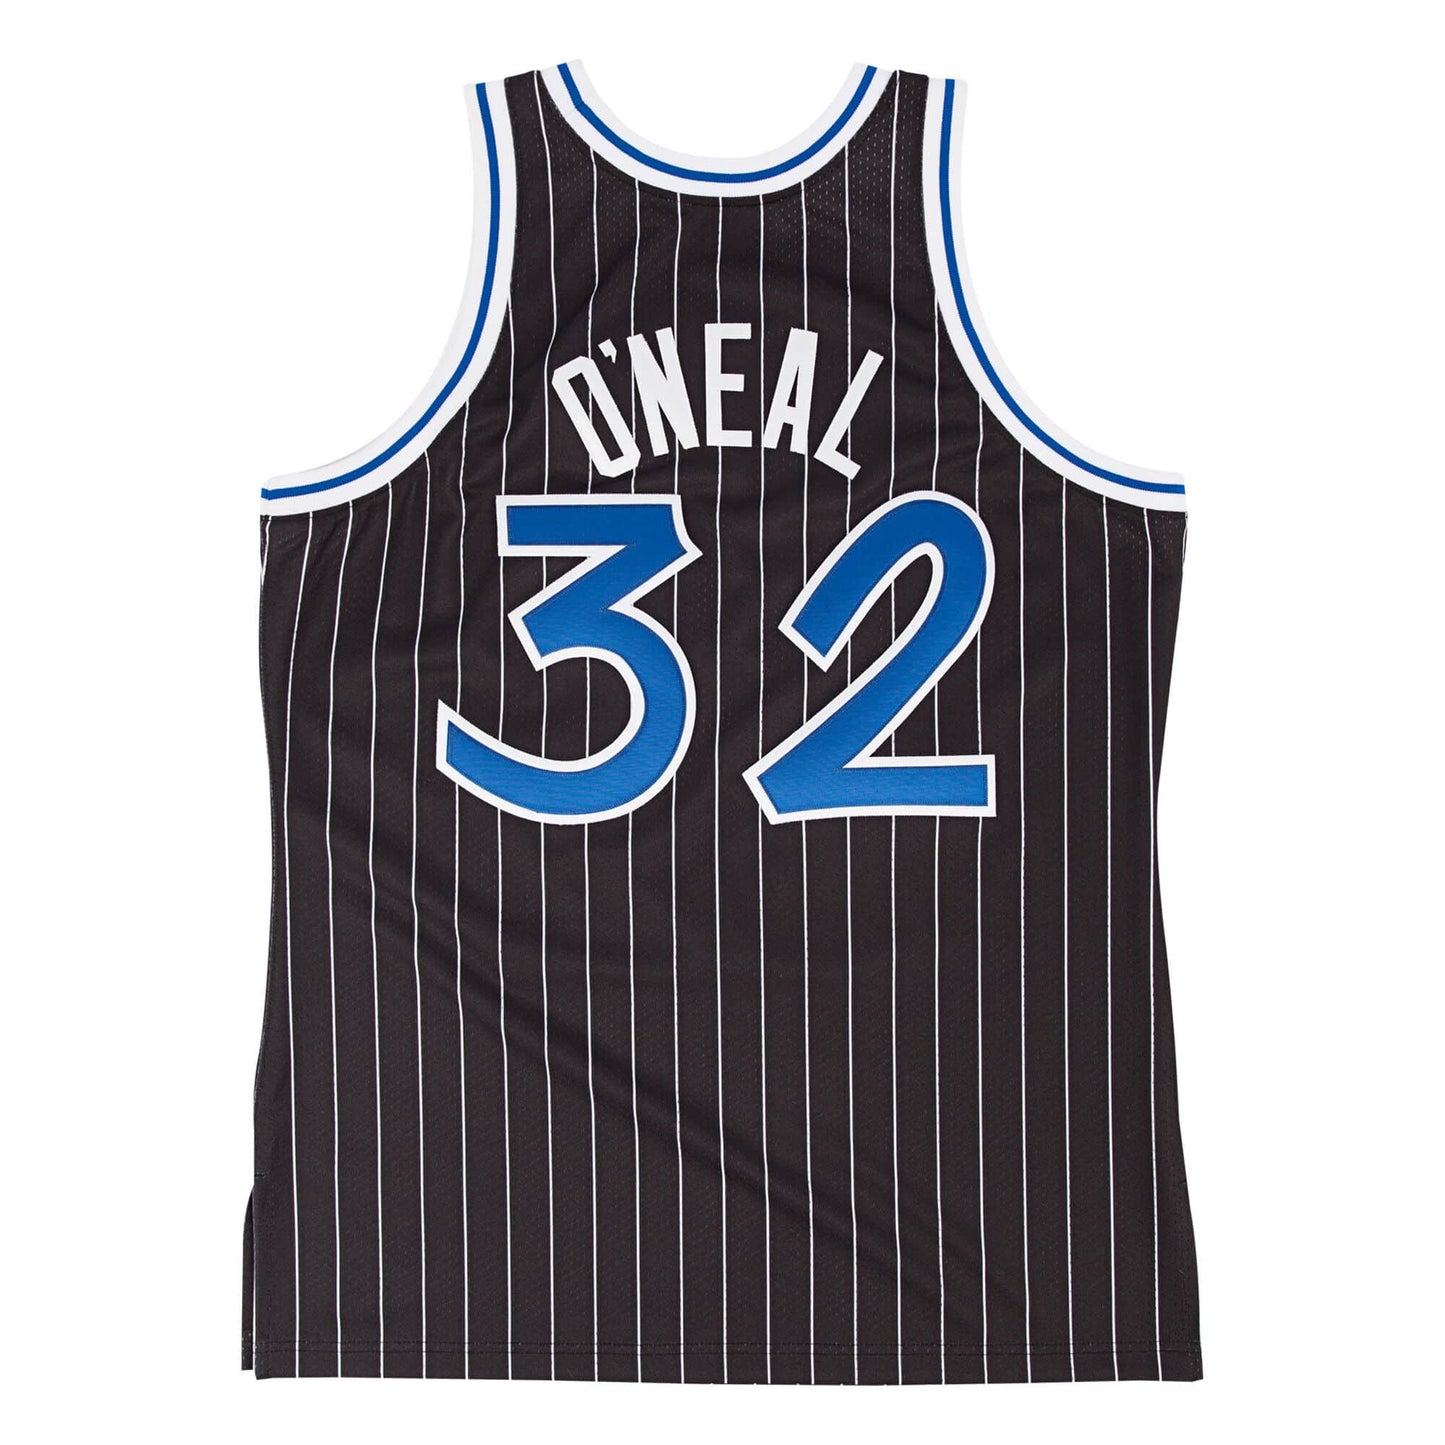 Mitchell & Ness 1994-95 Orlando Magic Shaquille O'Neal Authentic Jersey